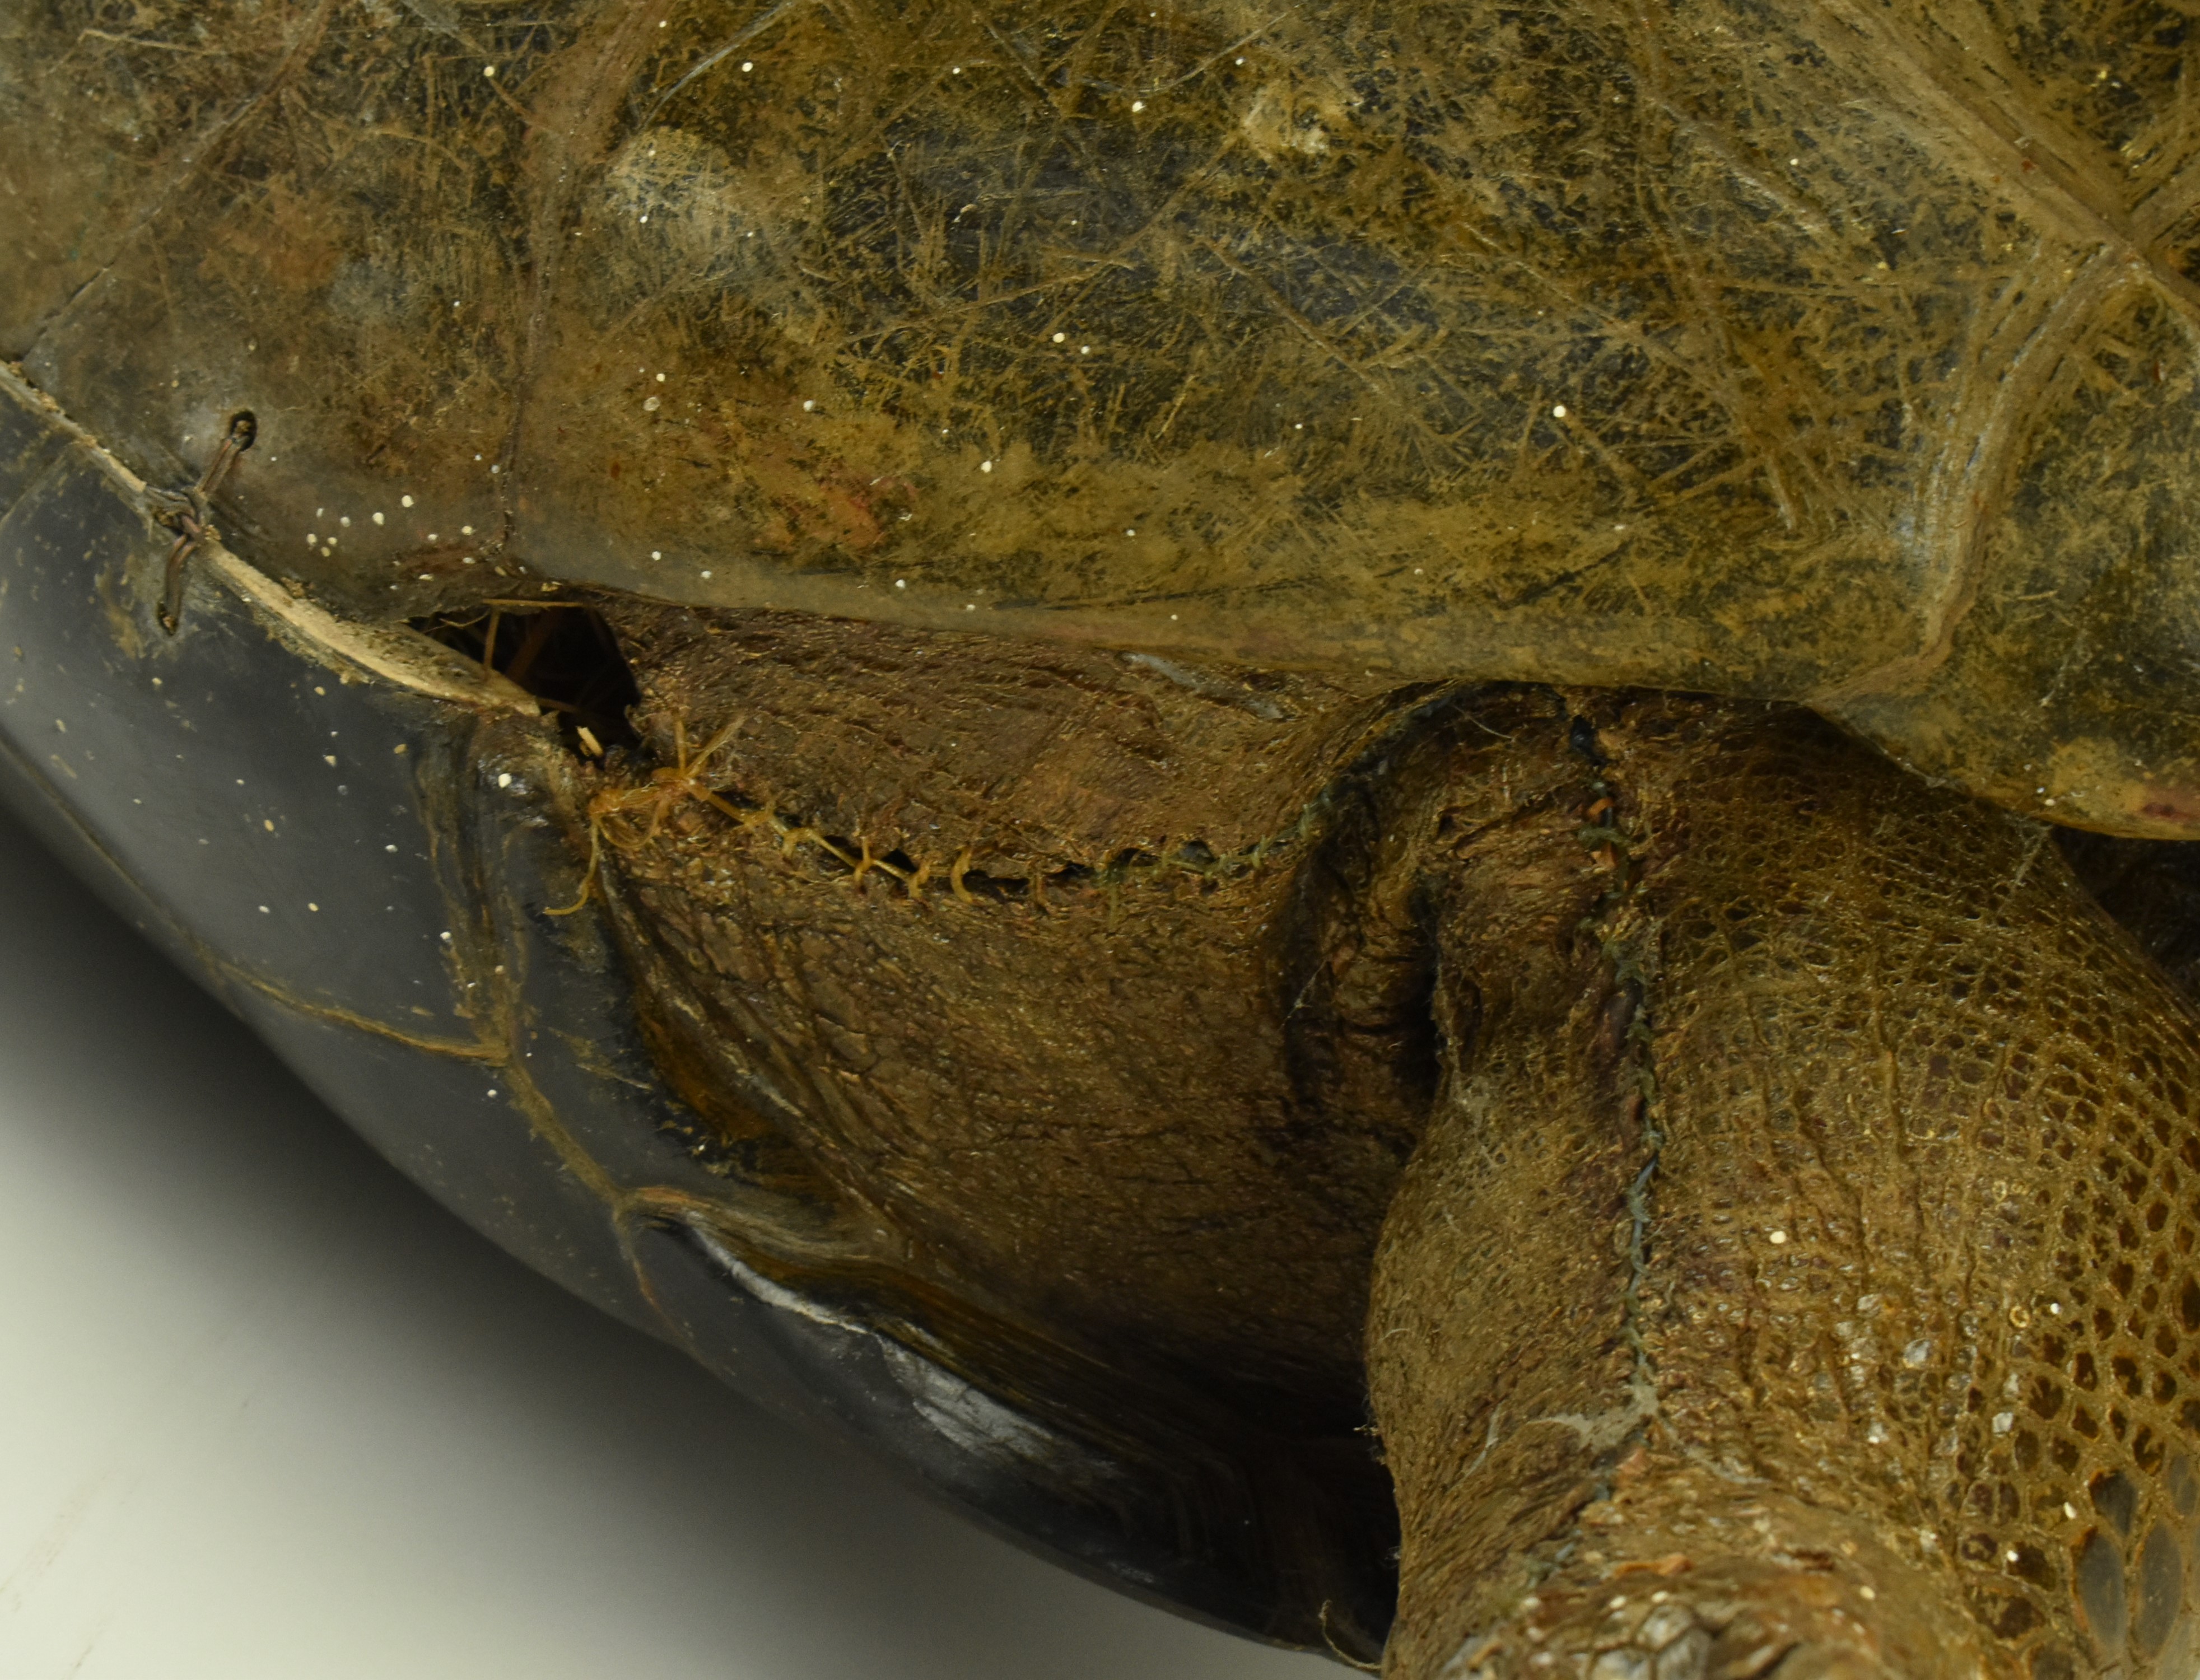 19TH CENTURY TAXIDERMY GALAPAGOS GIANT TURTLE - Image 10 of 11